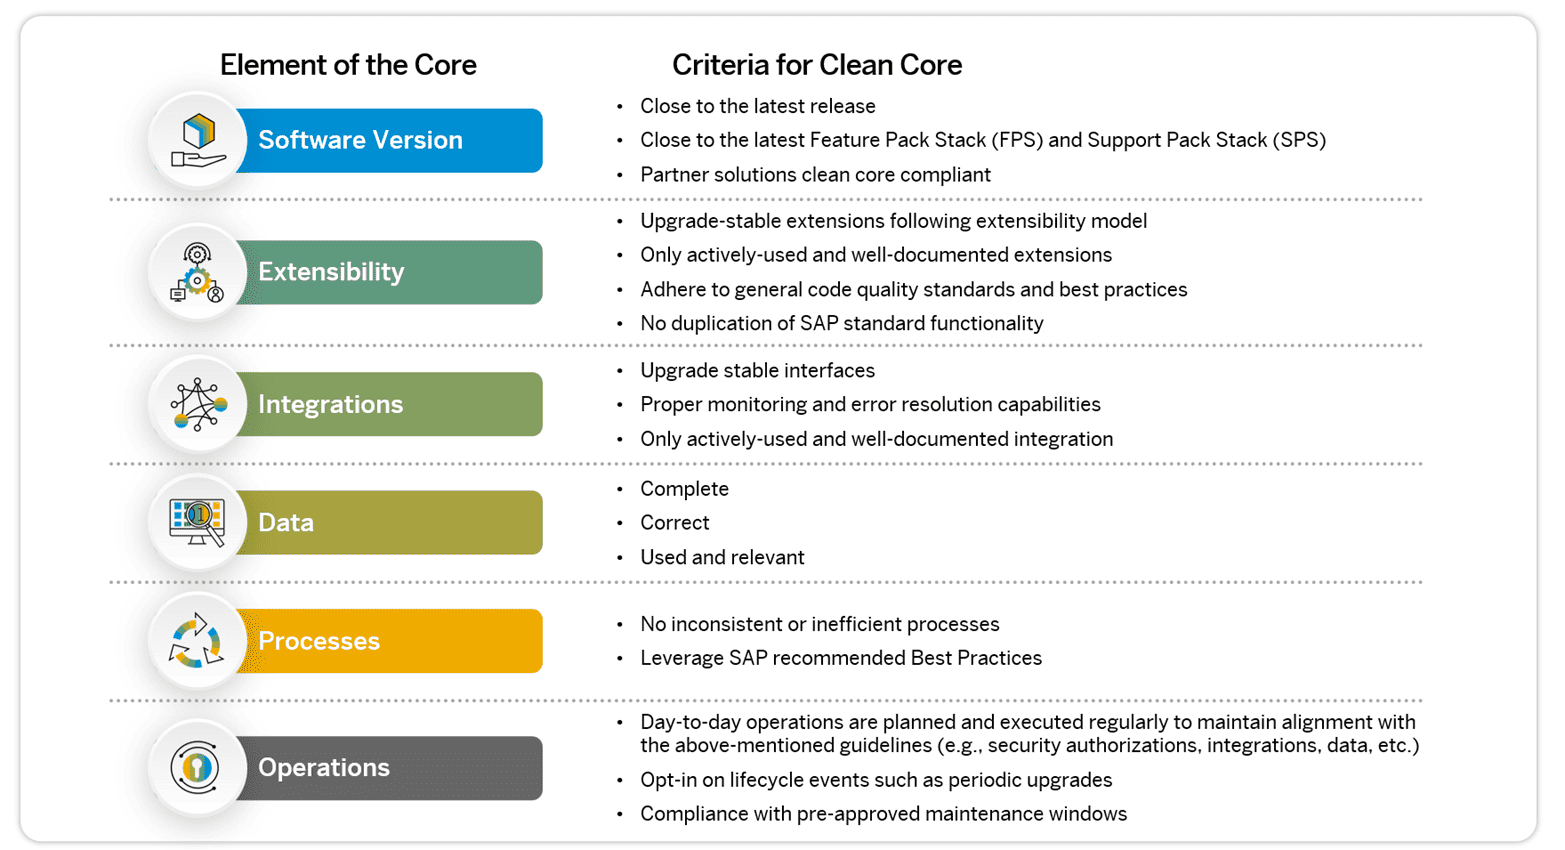 Criteria for Clean Core Why Flexibility, Configurability & Extensibility matter for Benefits Administration?